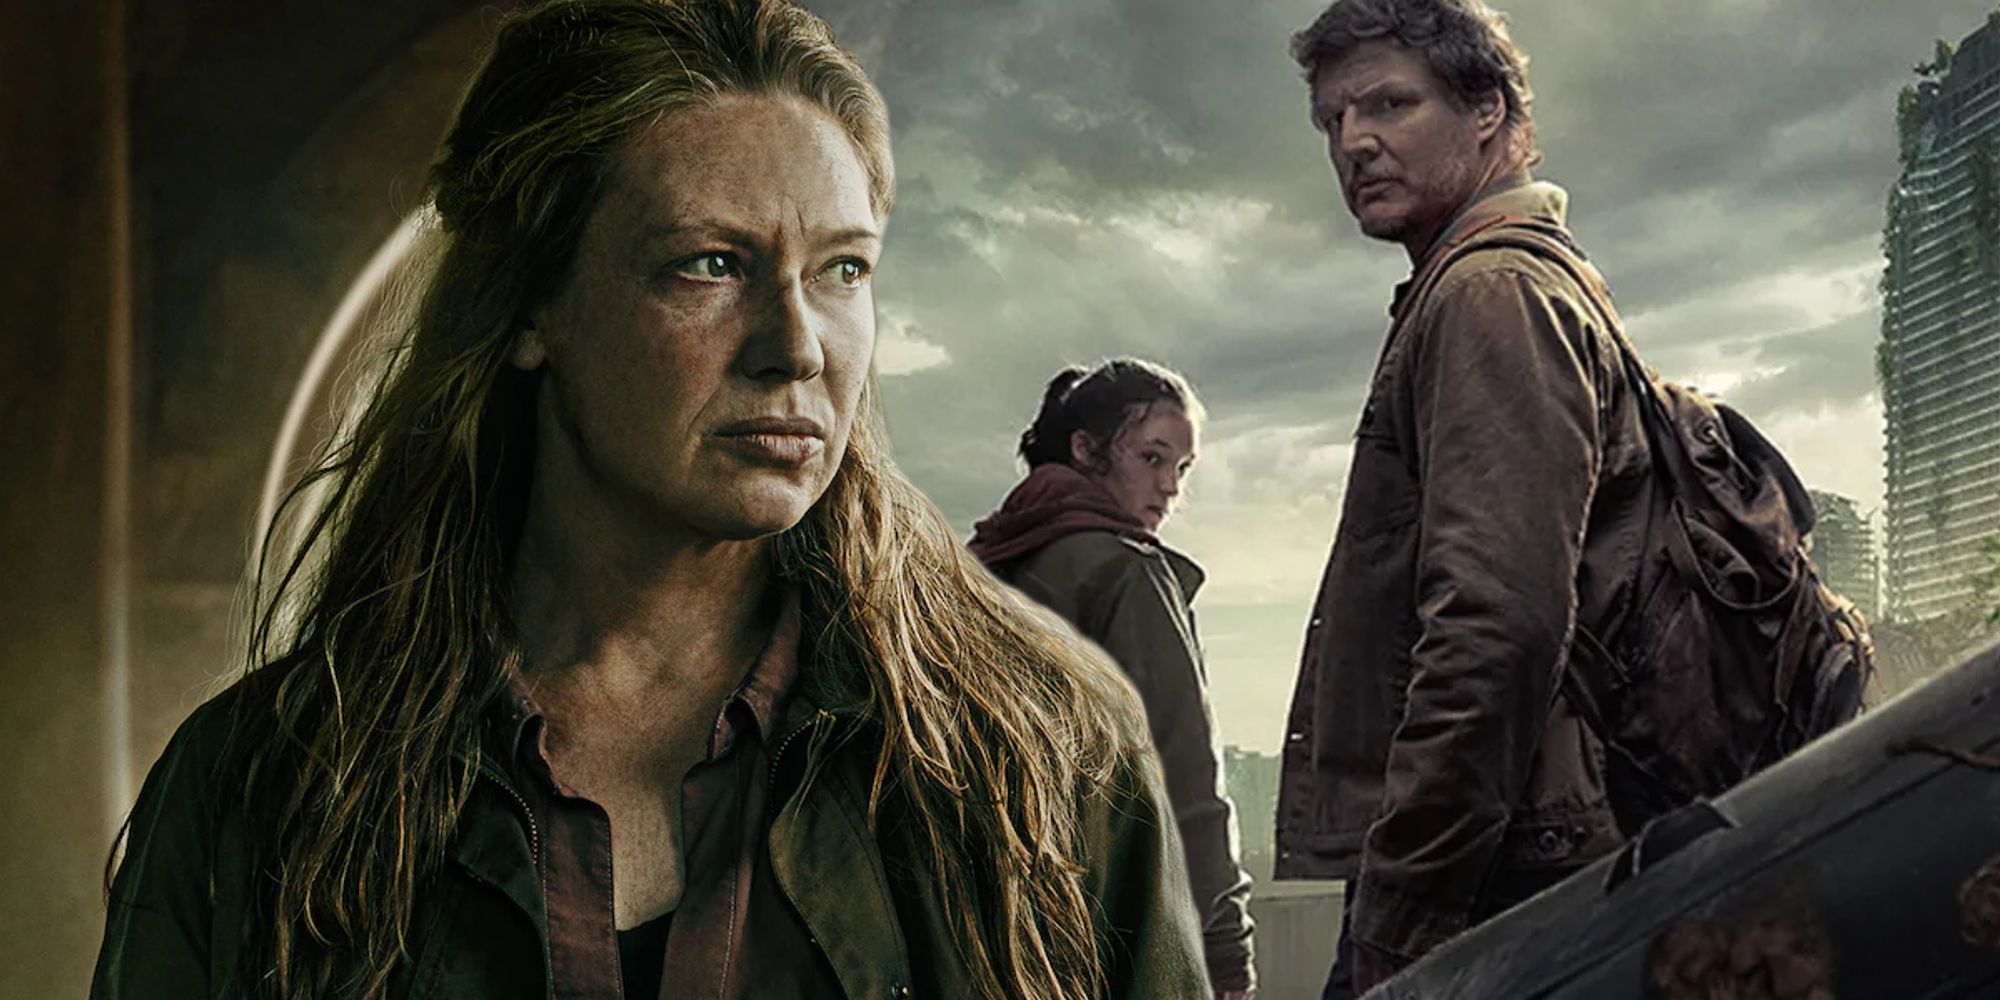 Anna Torv as Tess in official HBO character poster overlayed on Bella Ramsey's Ellie and Pedro Pascal's Joel in official HBO Last of Us poster